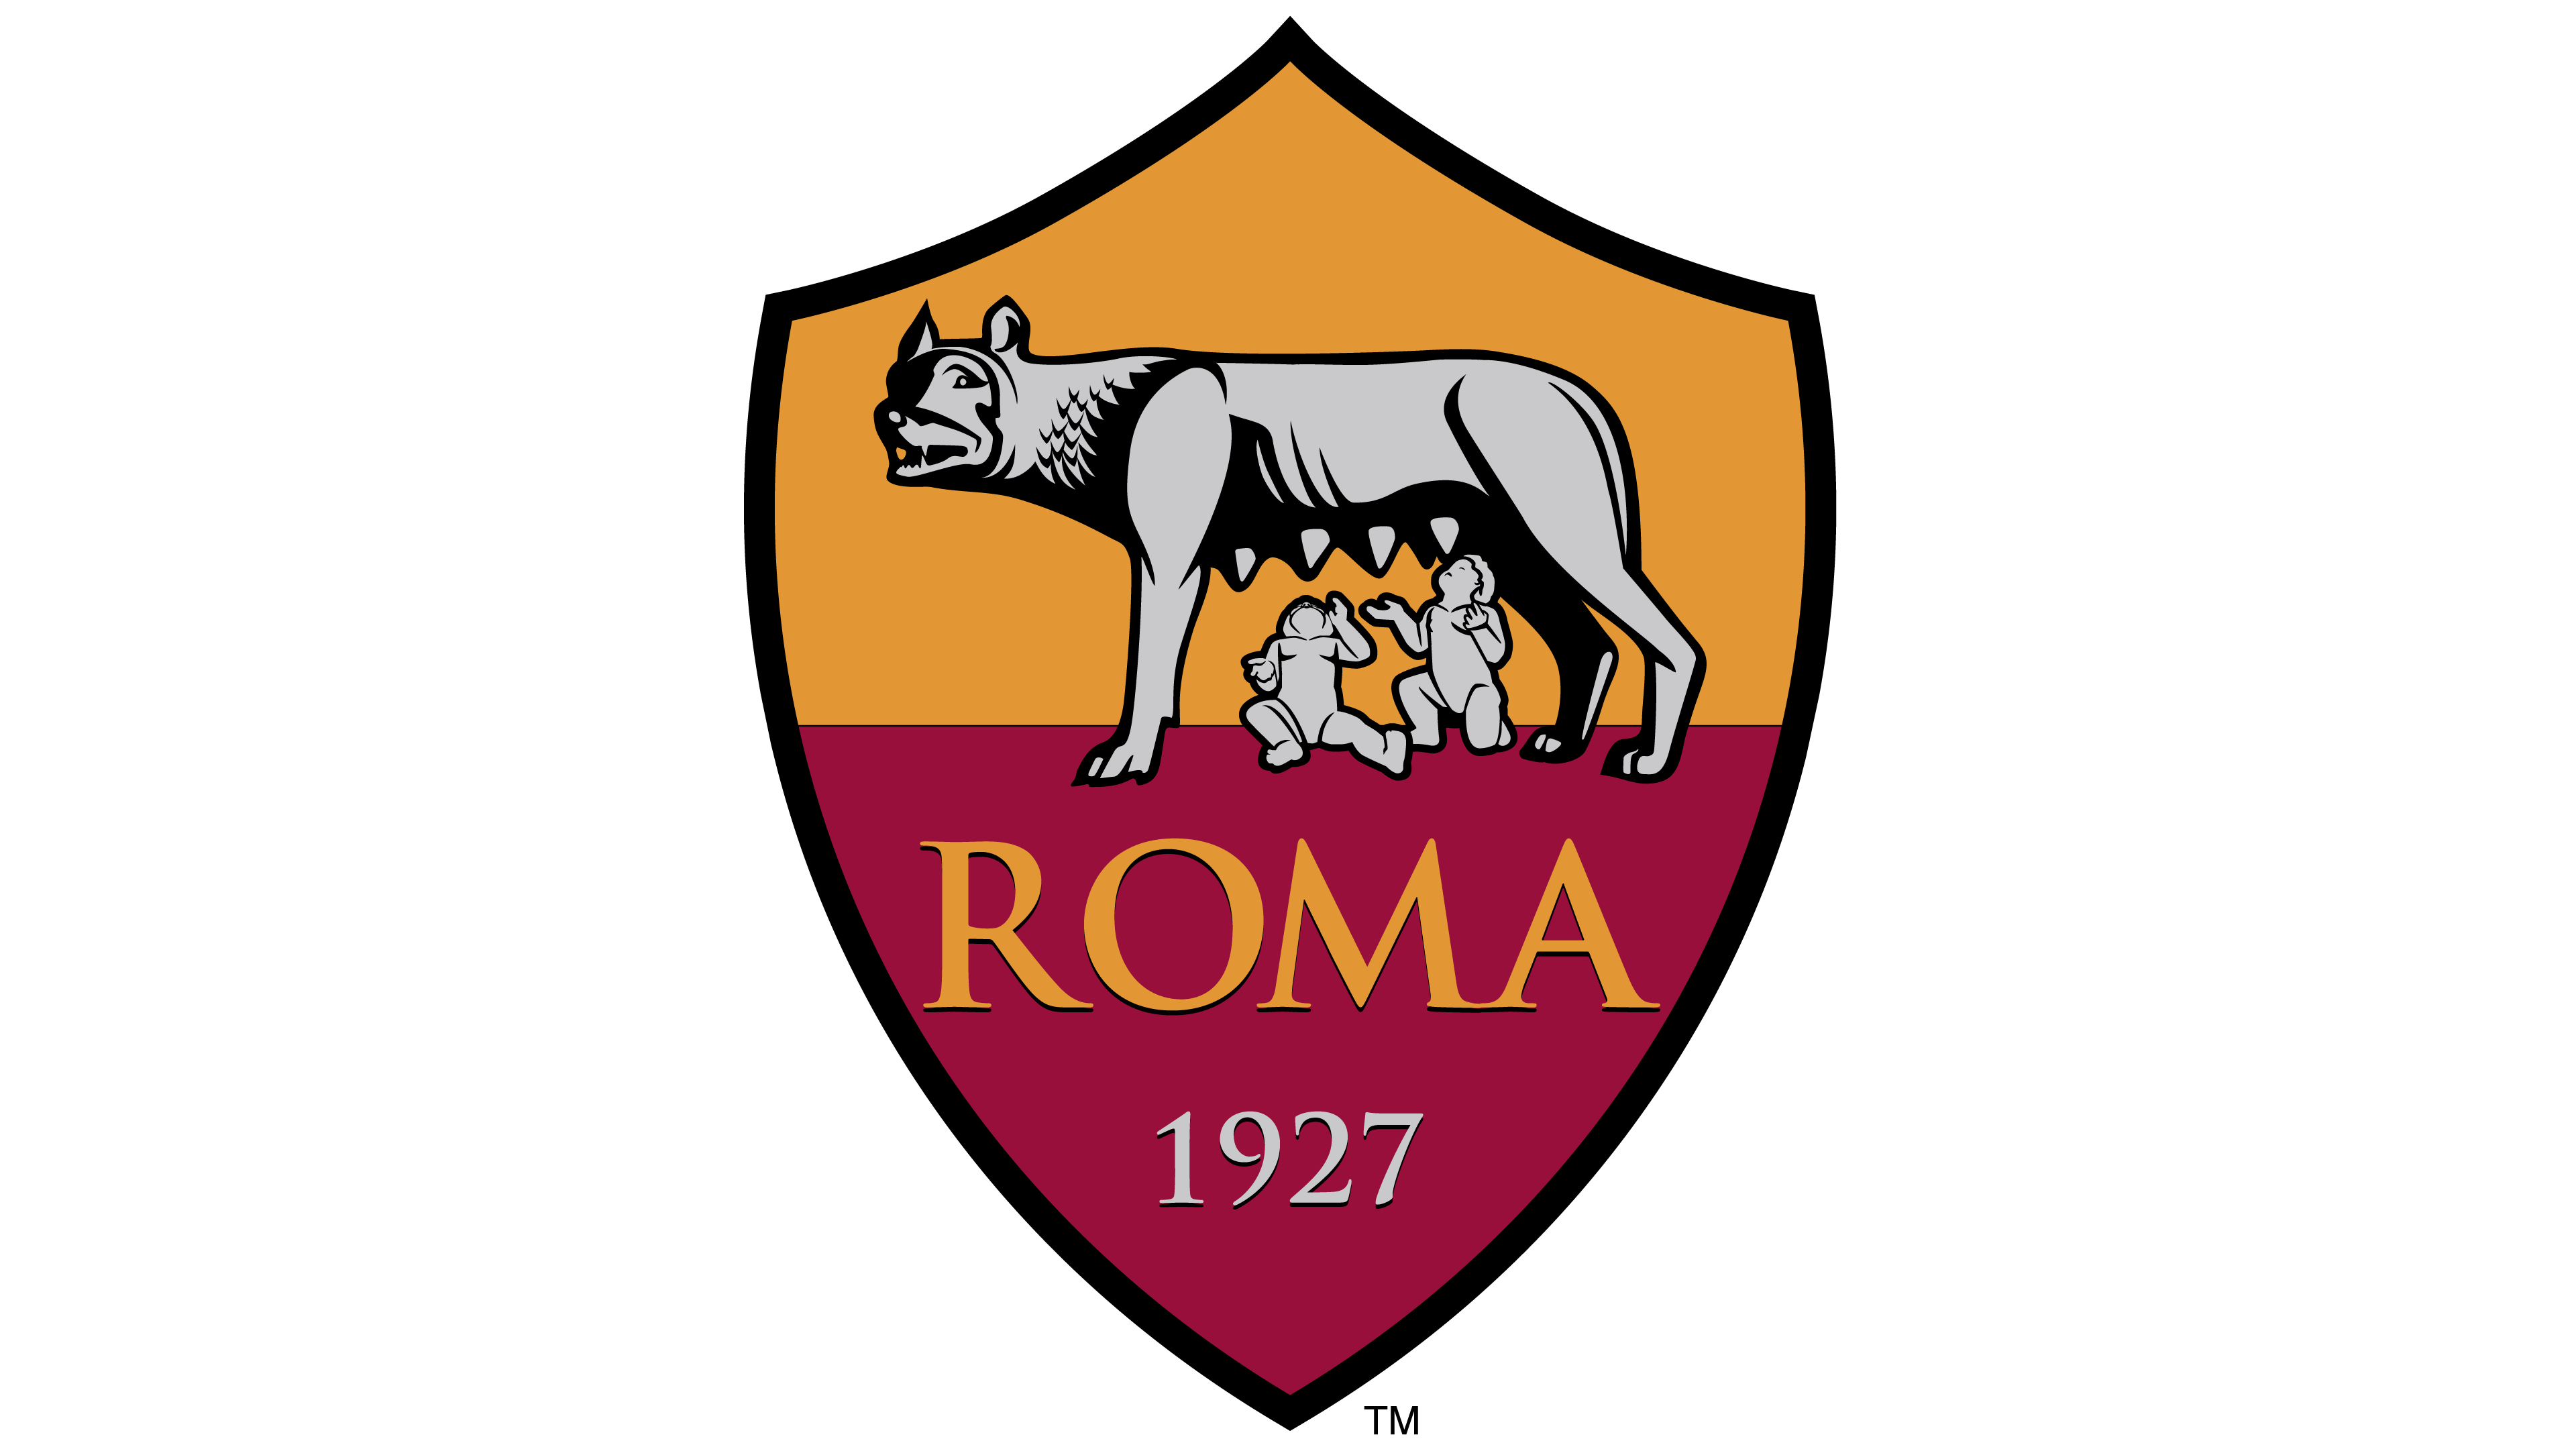 Colorful Wolf Logo - Roma logo History of the Team Name and emblem